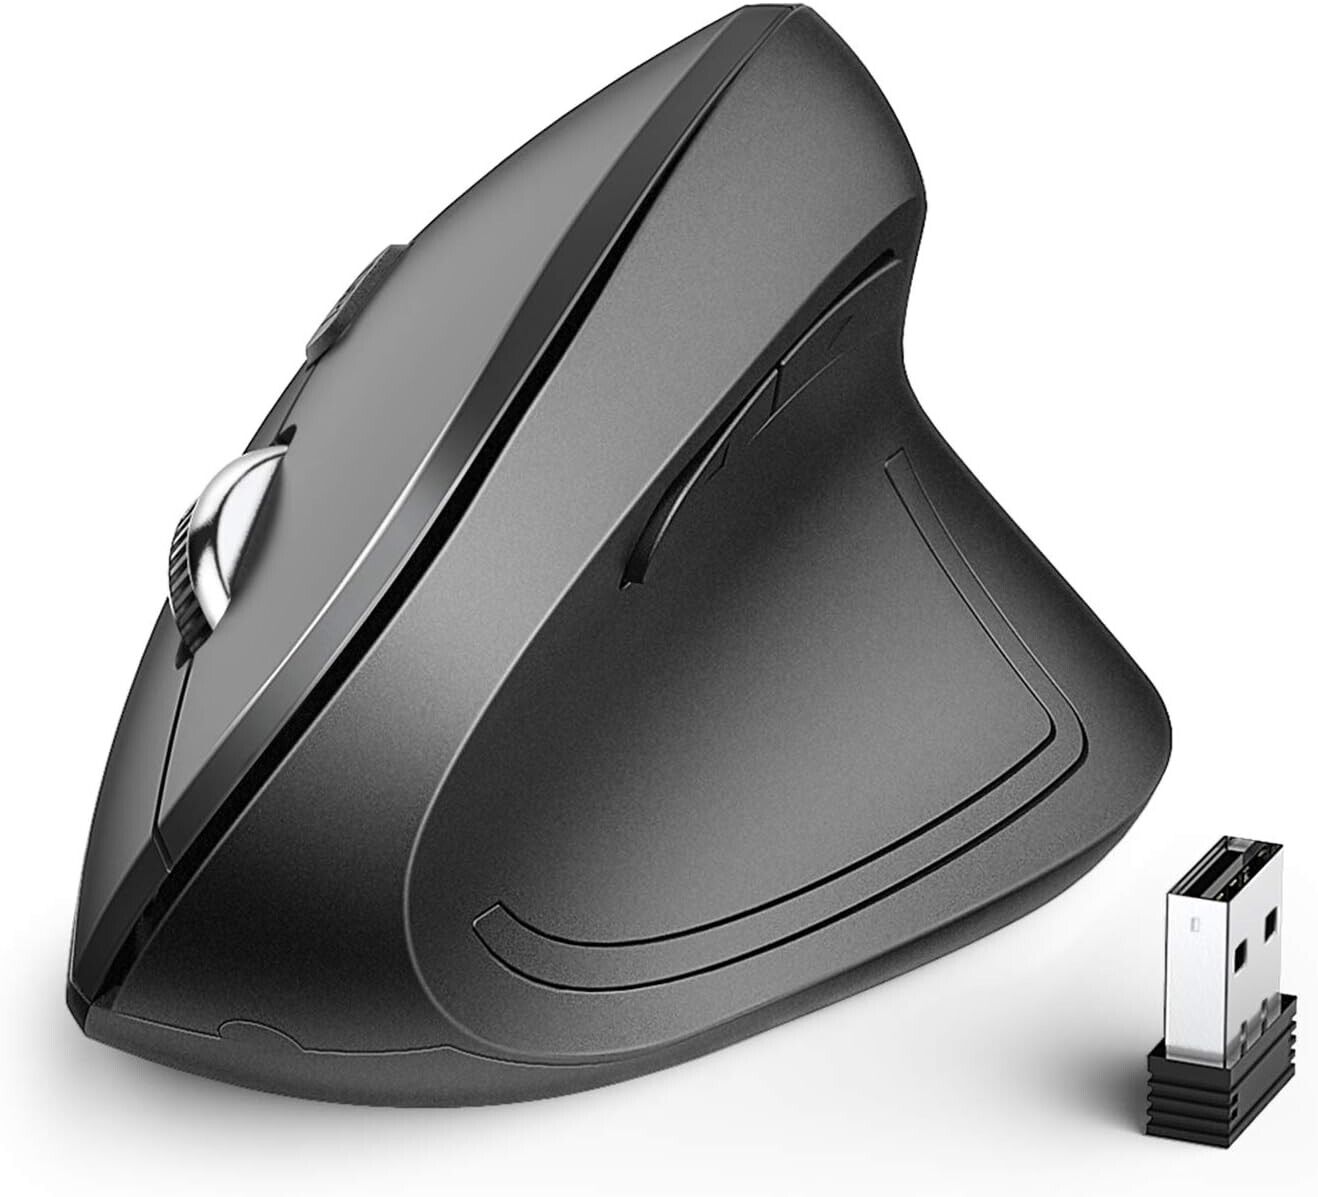 iClever Ergonomic Mouse, WM101 Wireless Vertical Mouse 6 Buttons with Adjustable